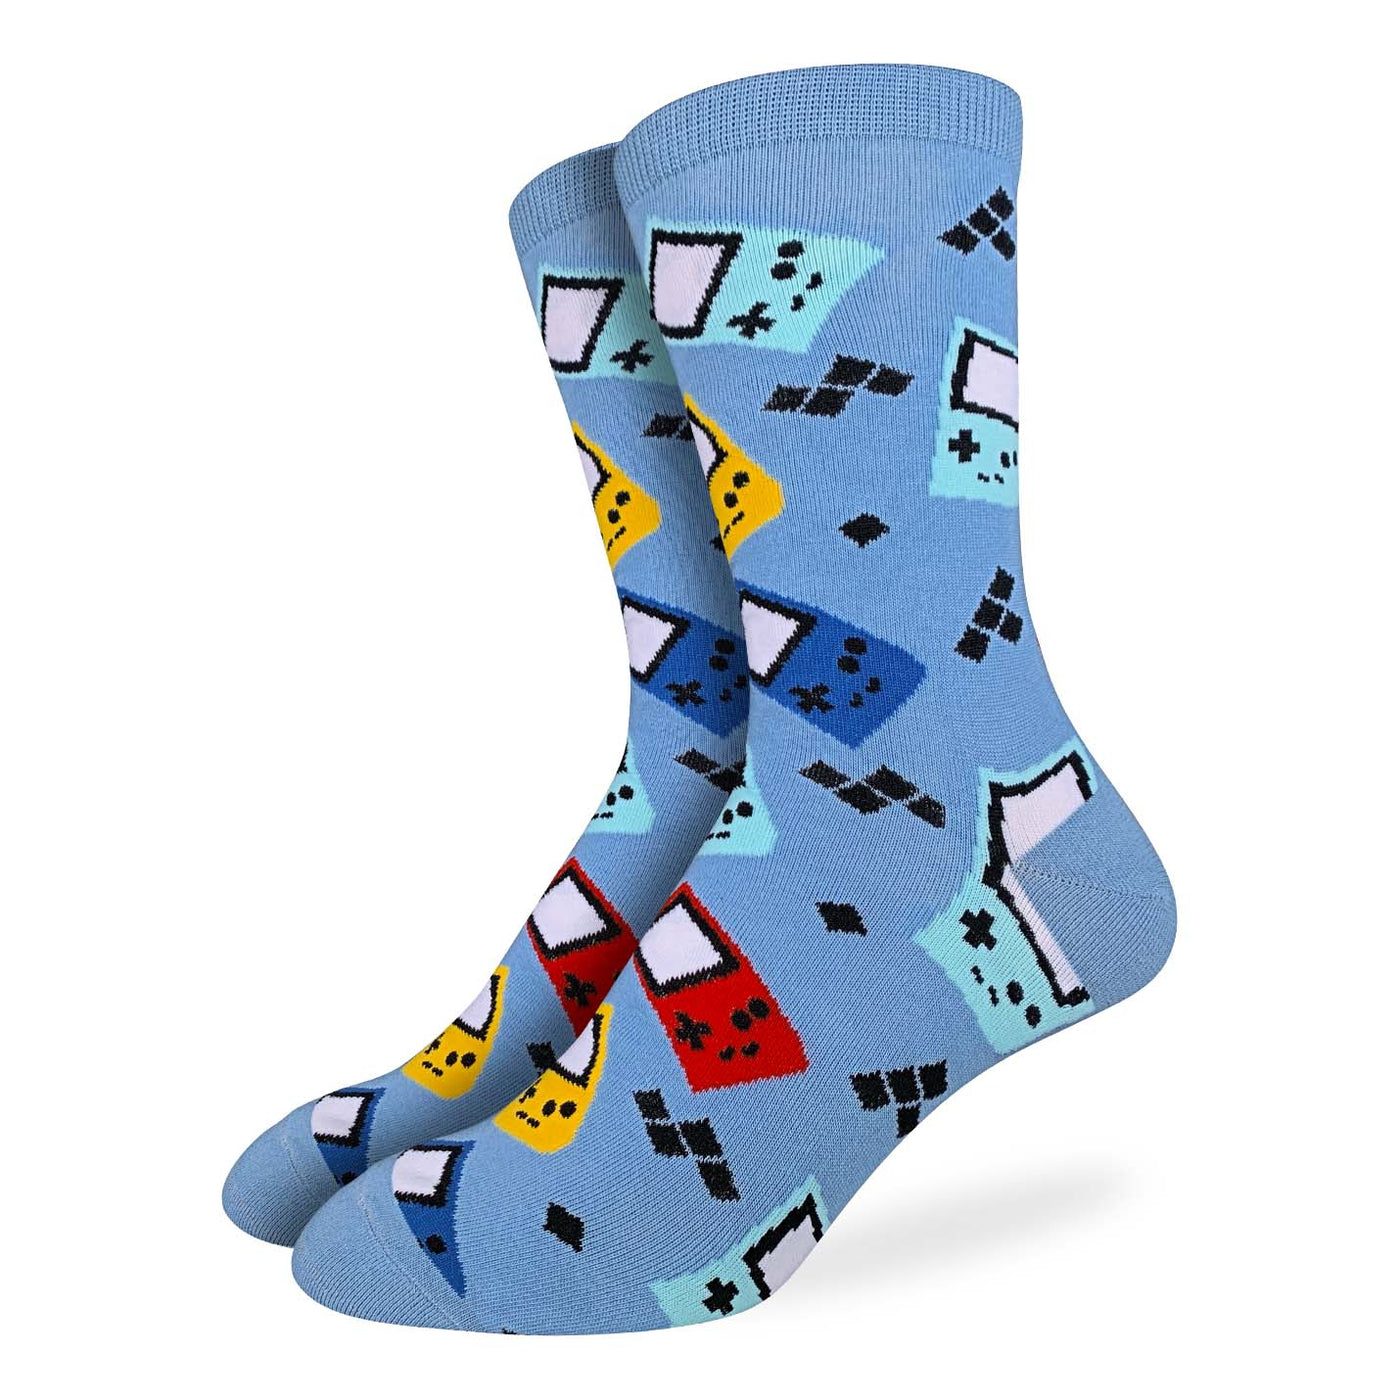 "Handheld Game Console" Crew Socks by Good Luck Sock